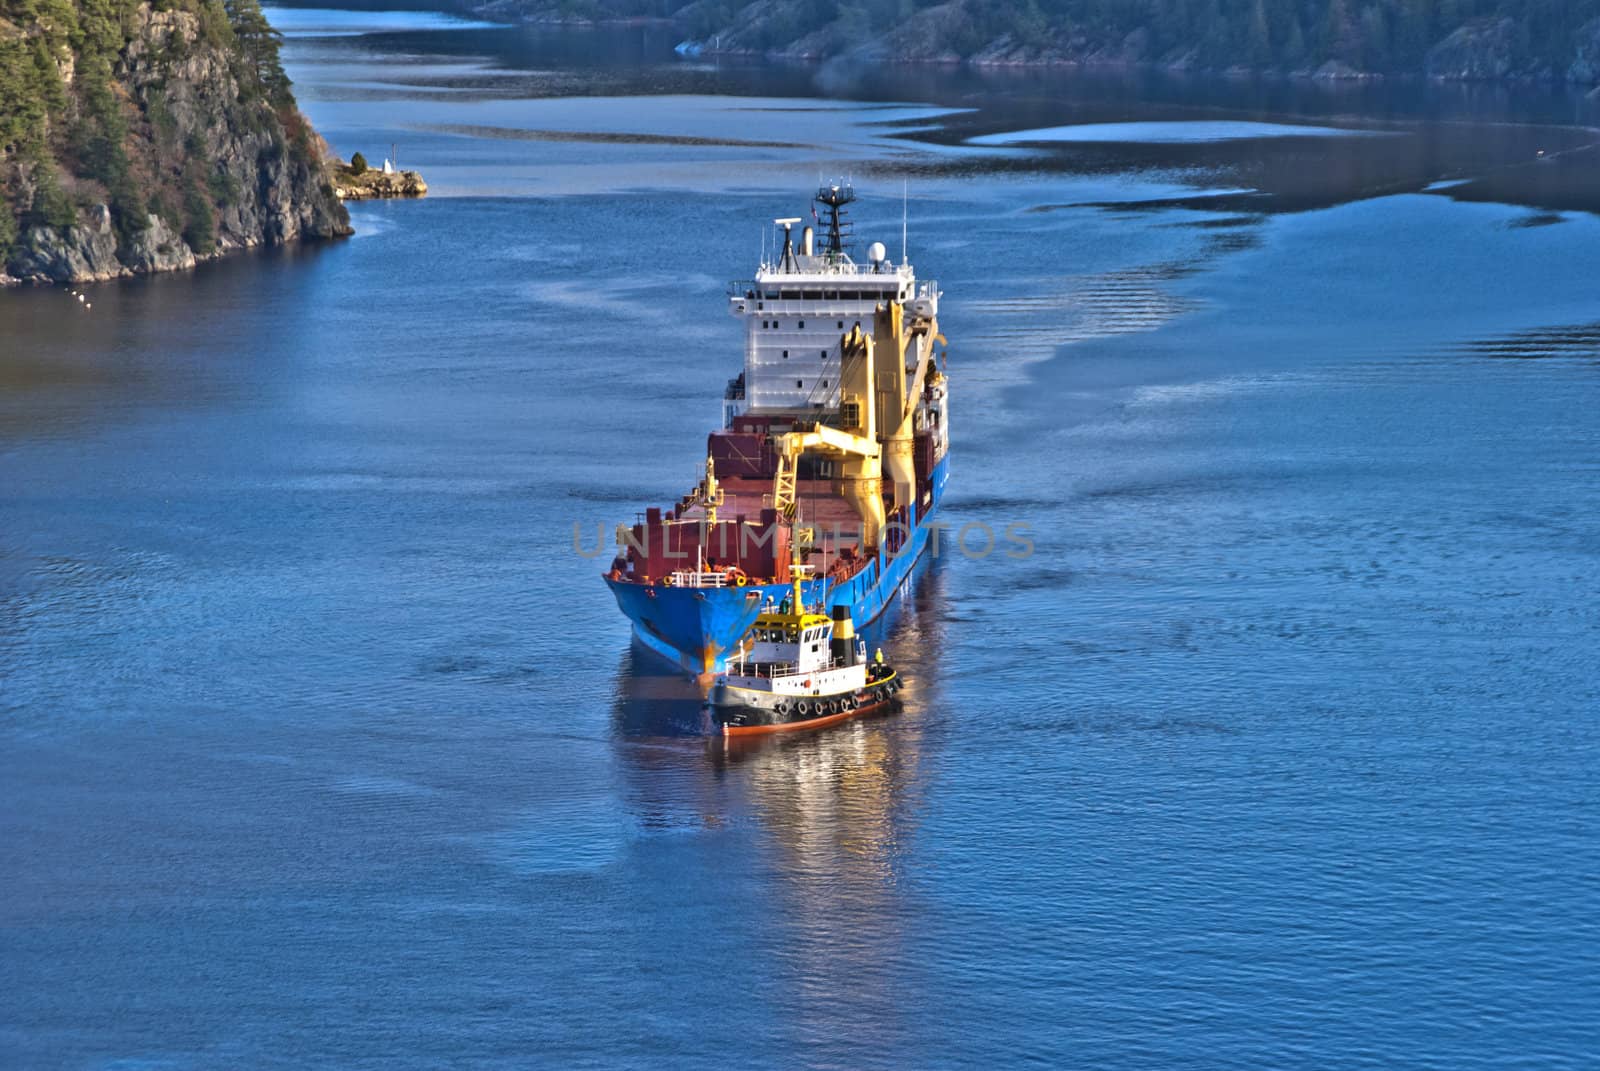 tug herbert are towing bbc europe out of the fjord, image 27 by steirus